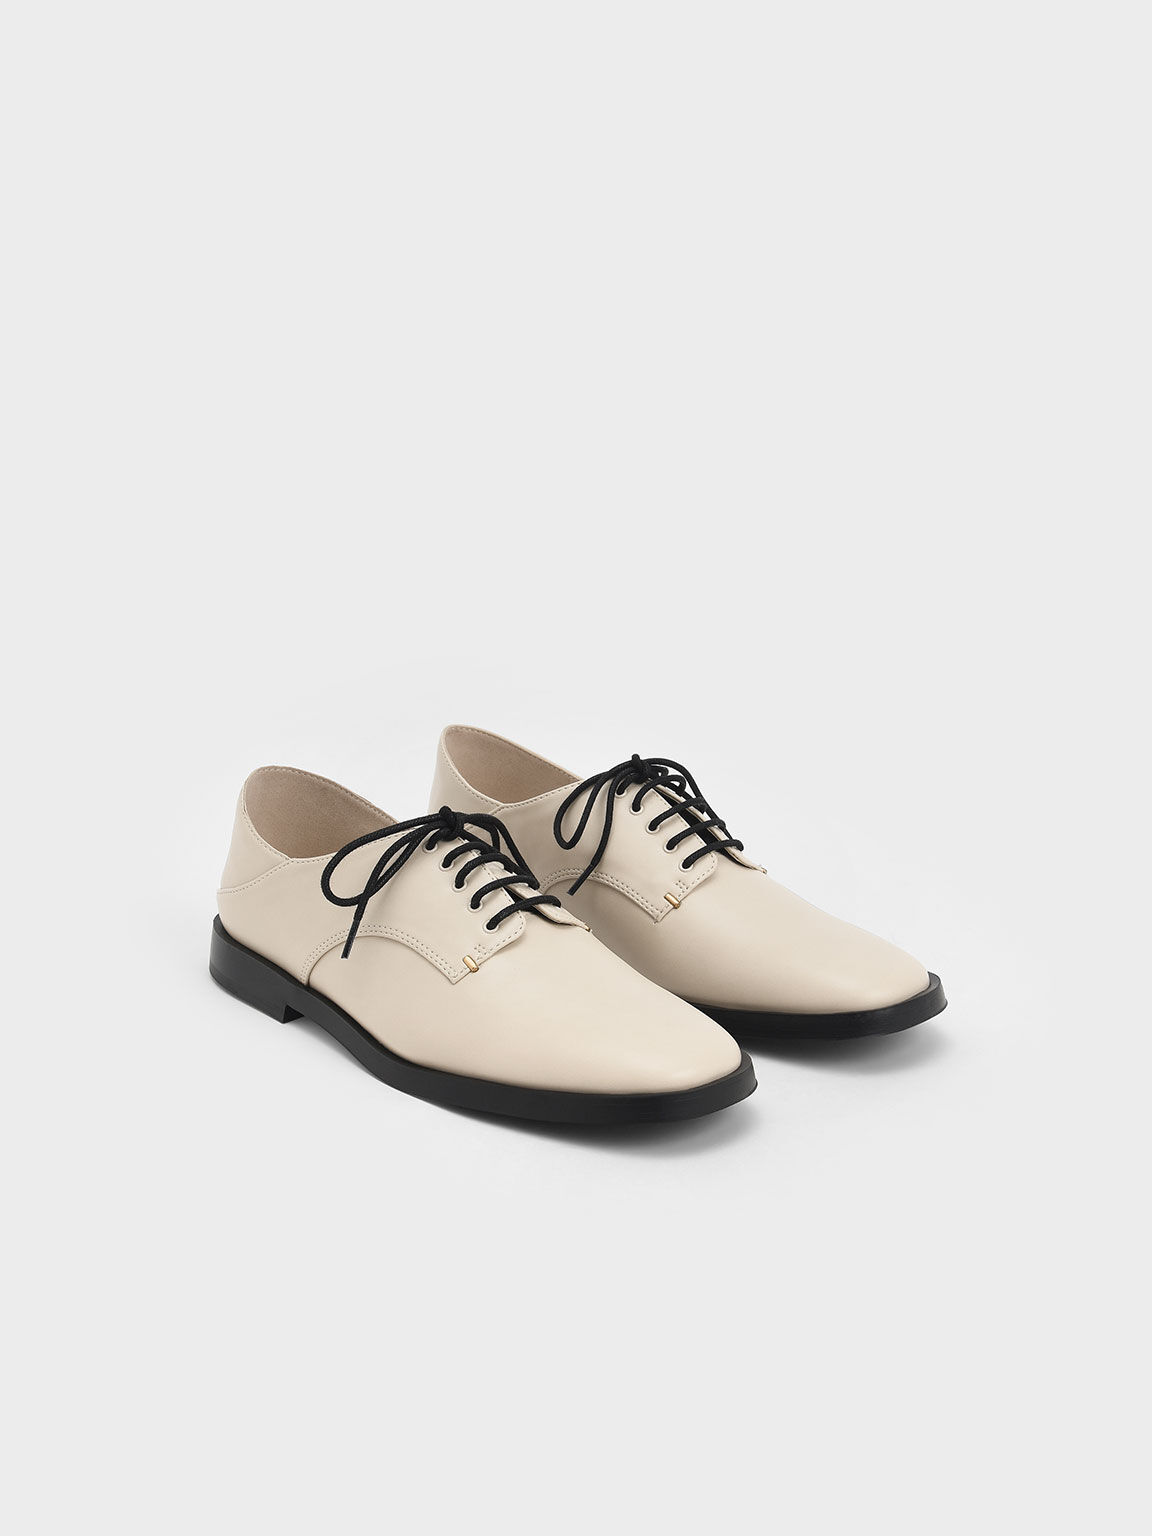 Metallic Accent Lace-Up Derby Shoes, Cream, hi-res